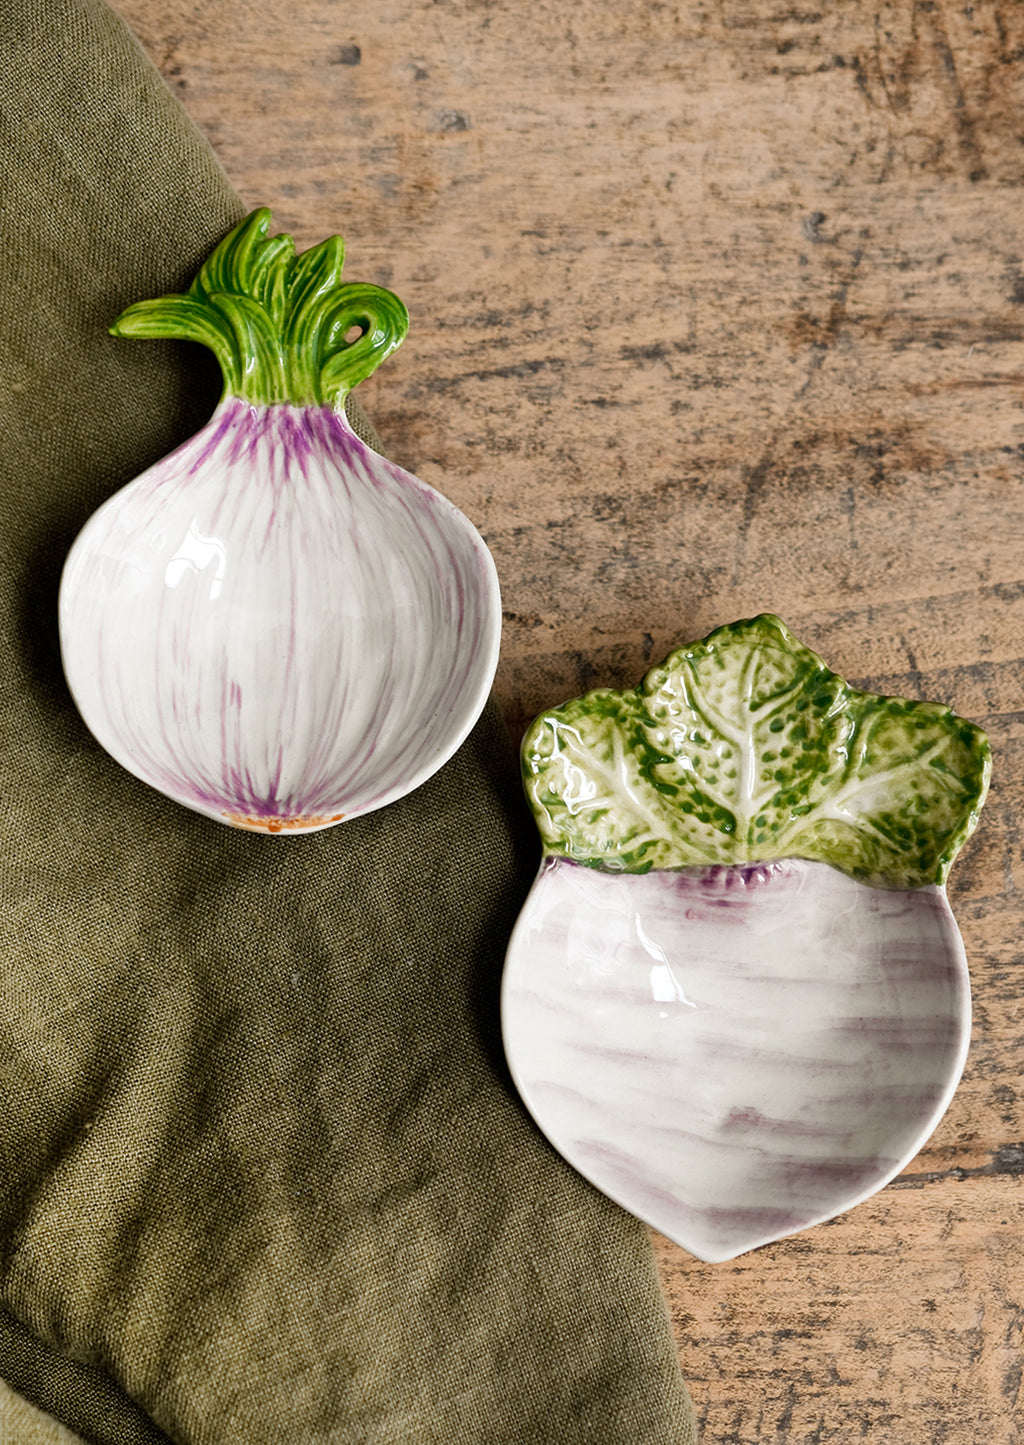 1: Ceramic dishes in the shape of an onion and turnip.